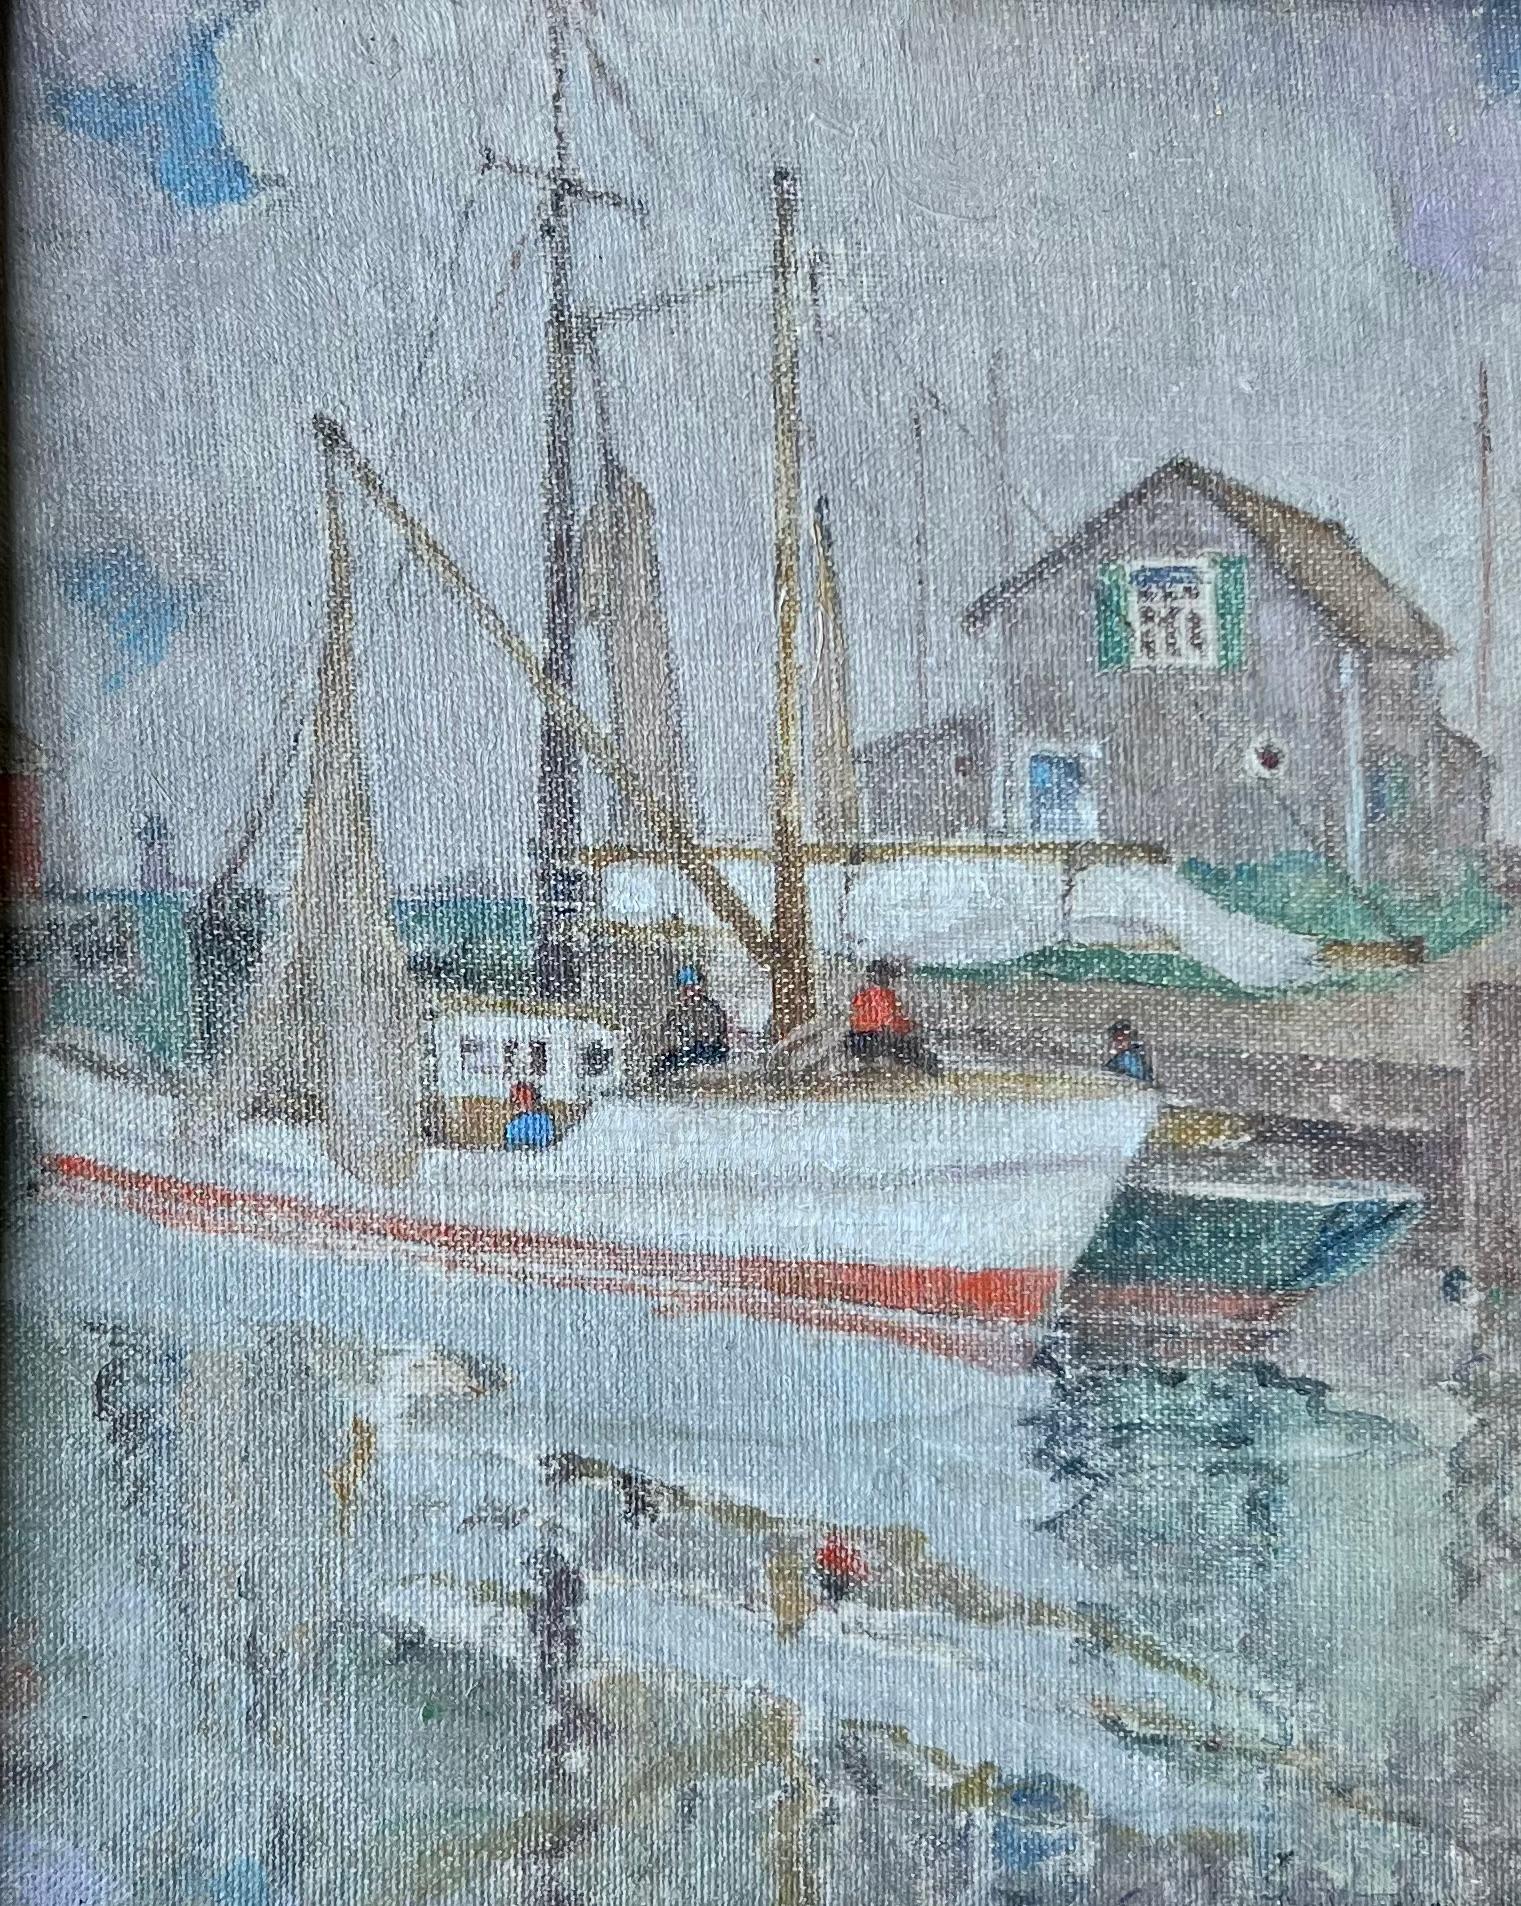 Fishing Boat on the Dock - Painting by Kate Montague Hall